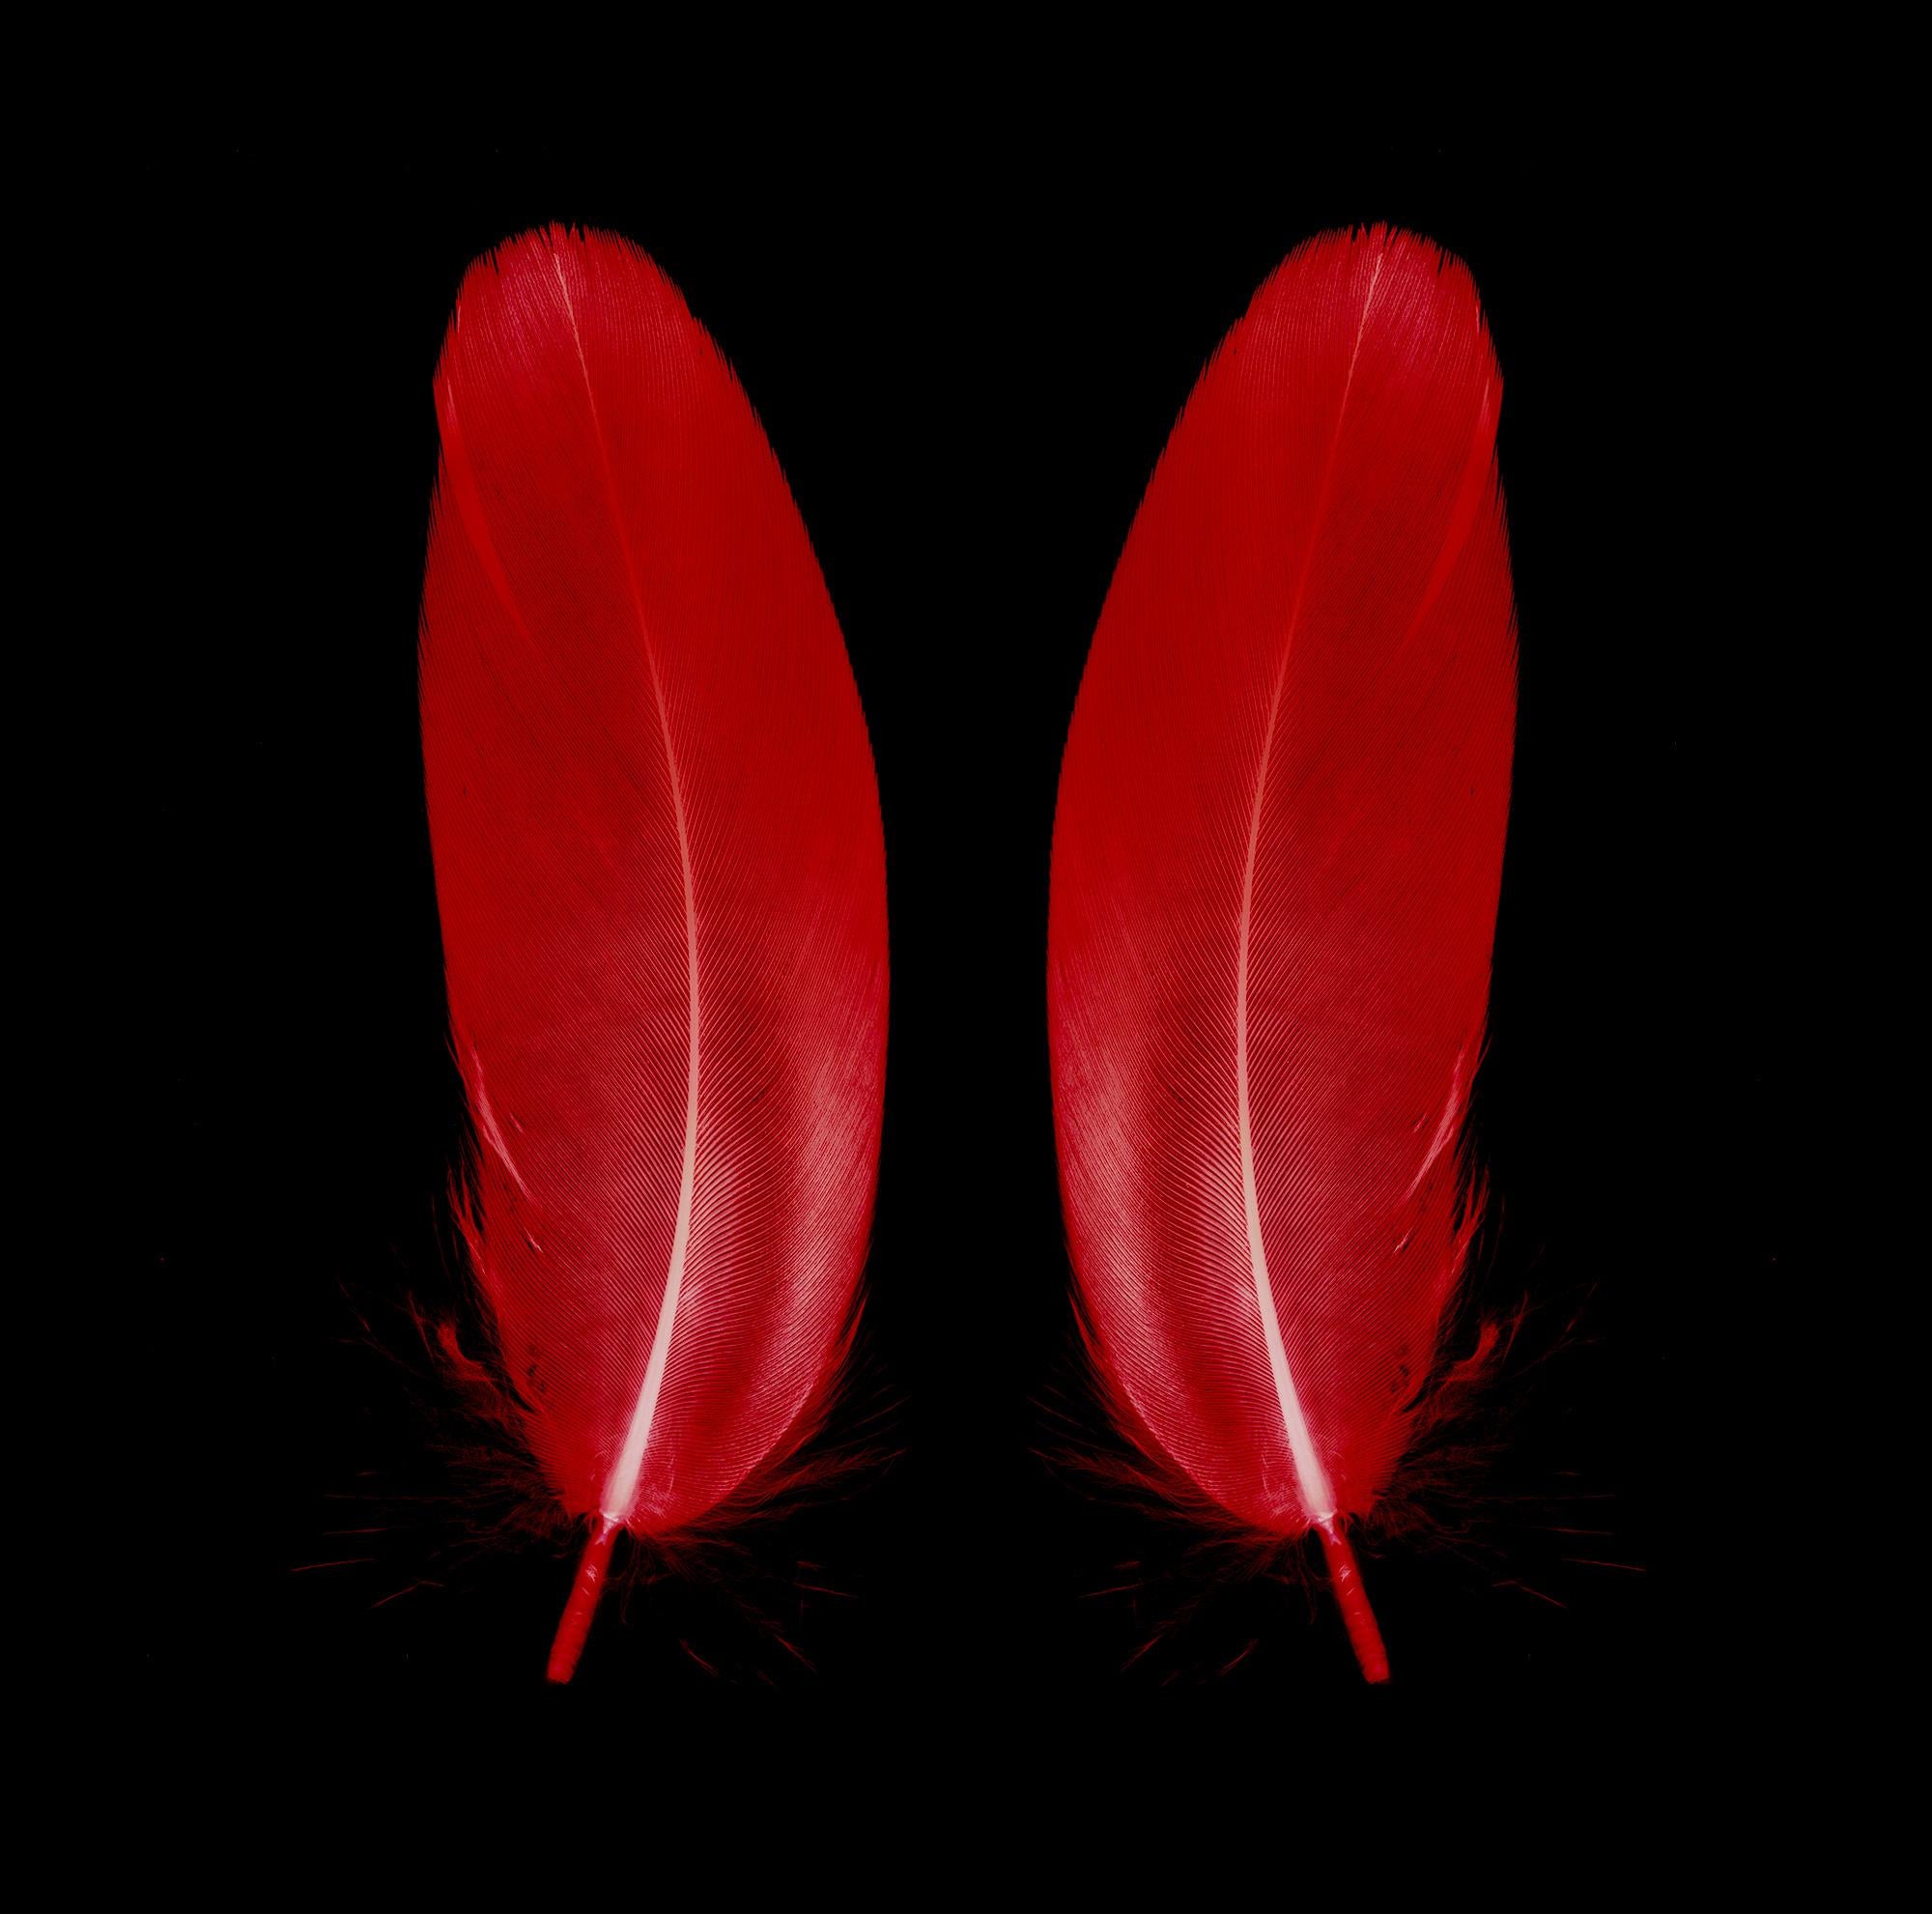 Scarlet Butterfly - Red Feathers - Conceptual, Color Photography